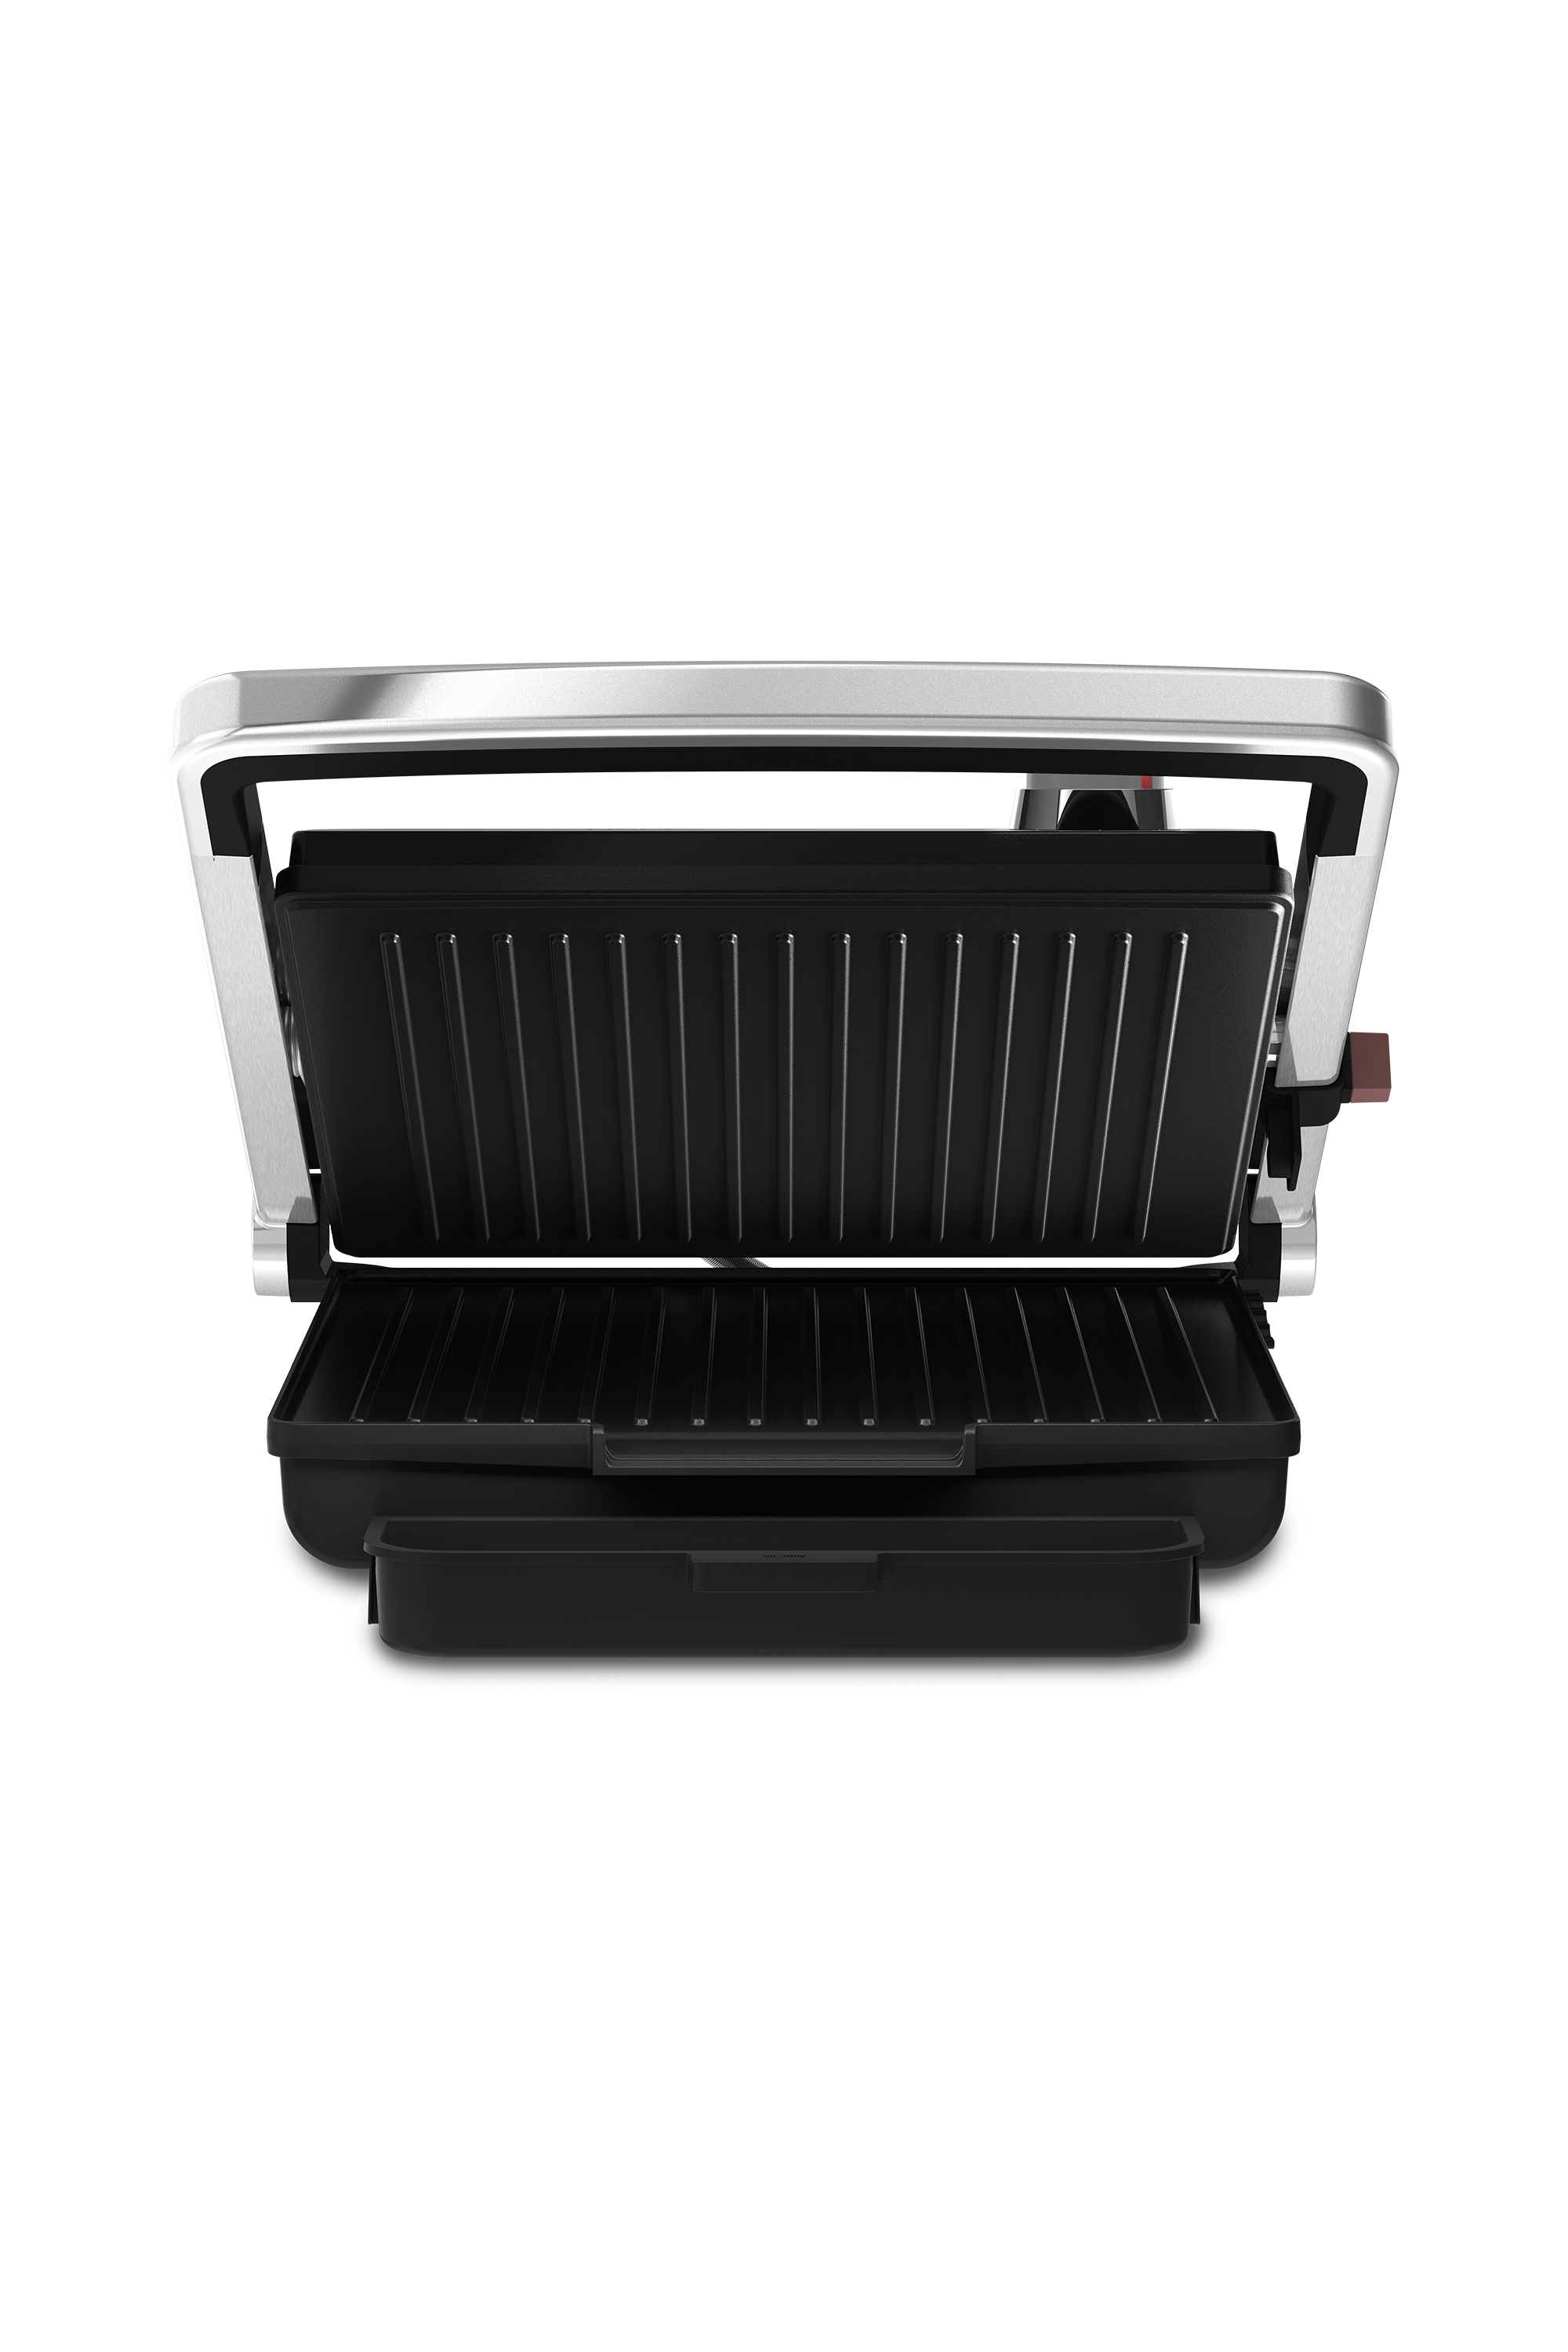 Cg810 Contact Grill